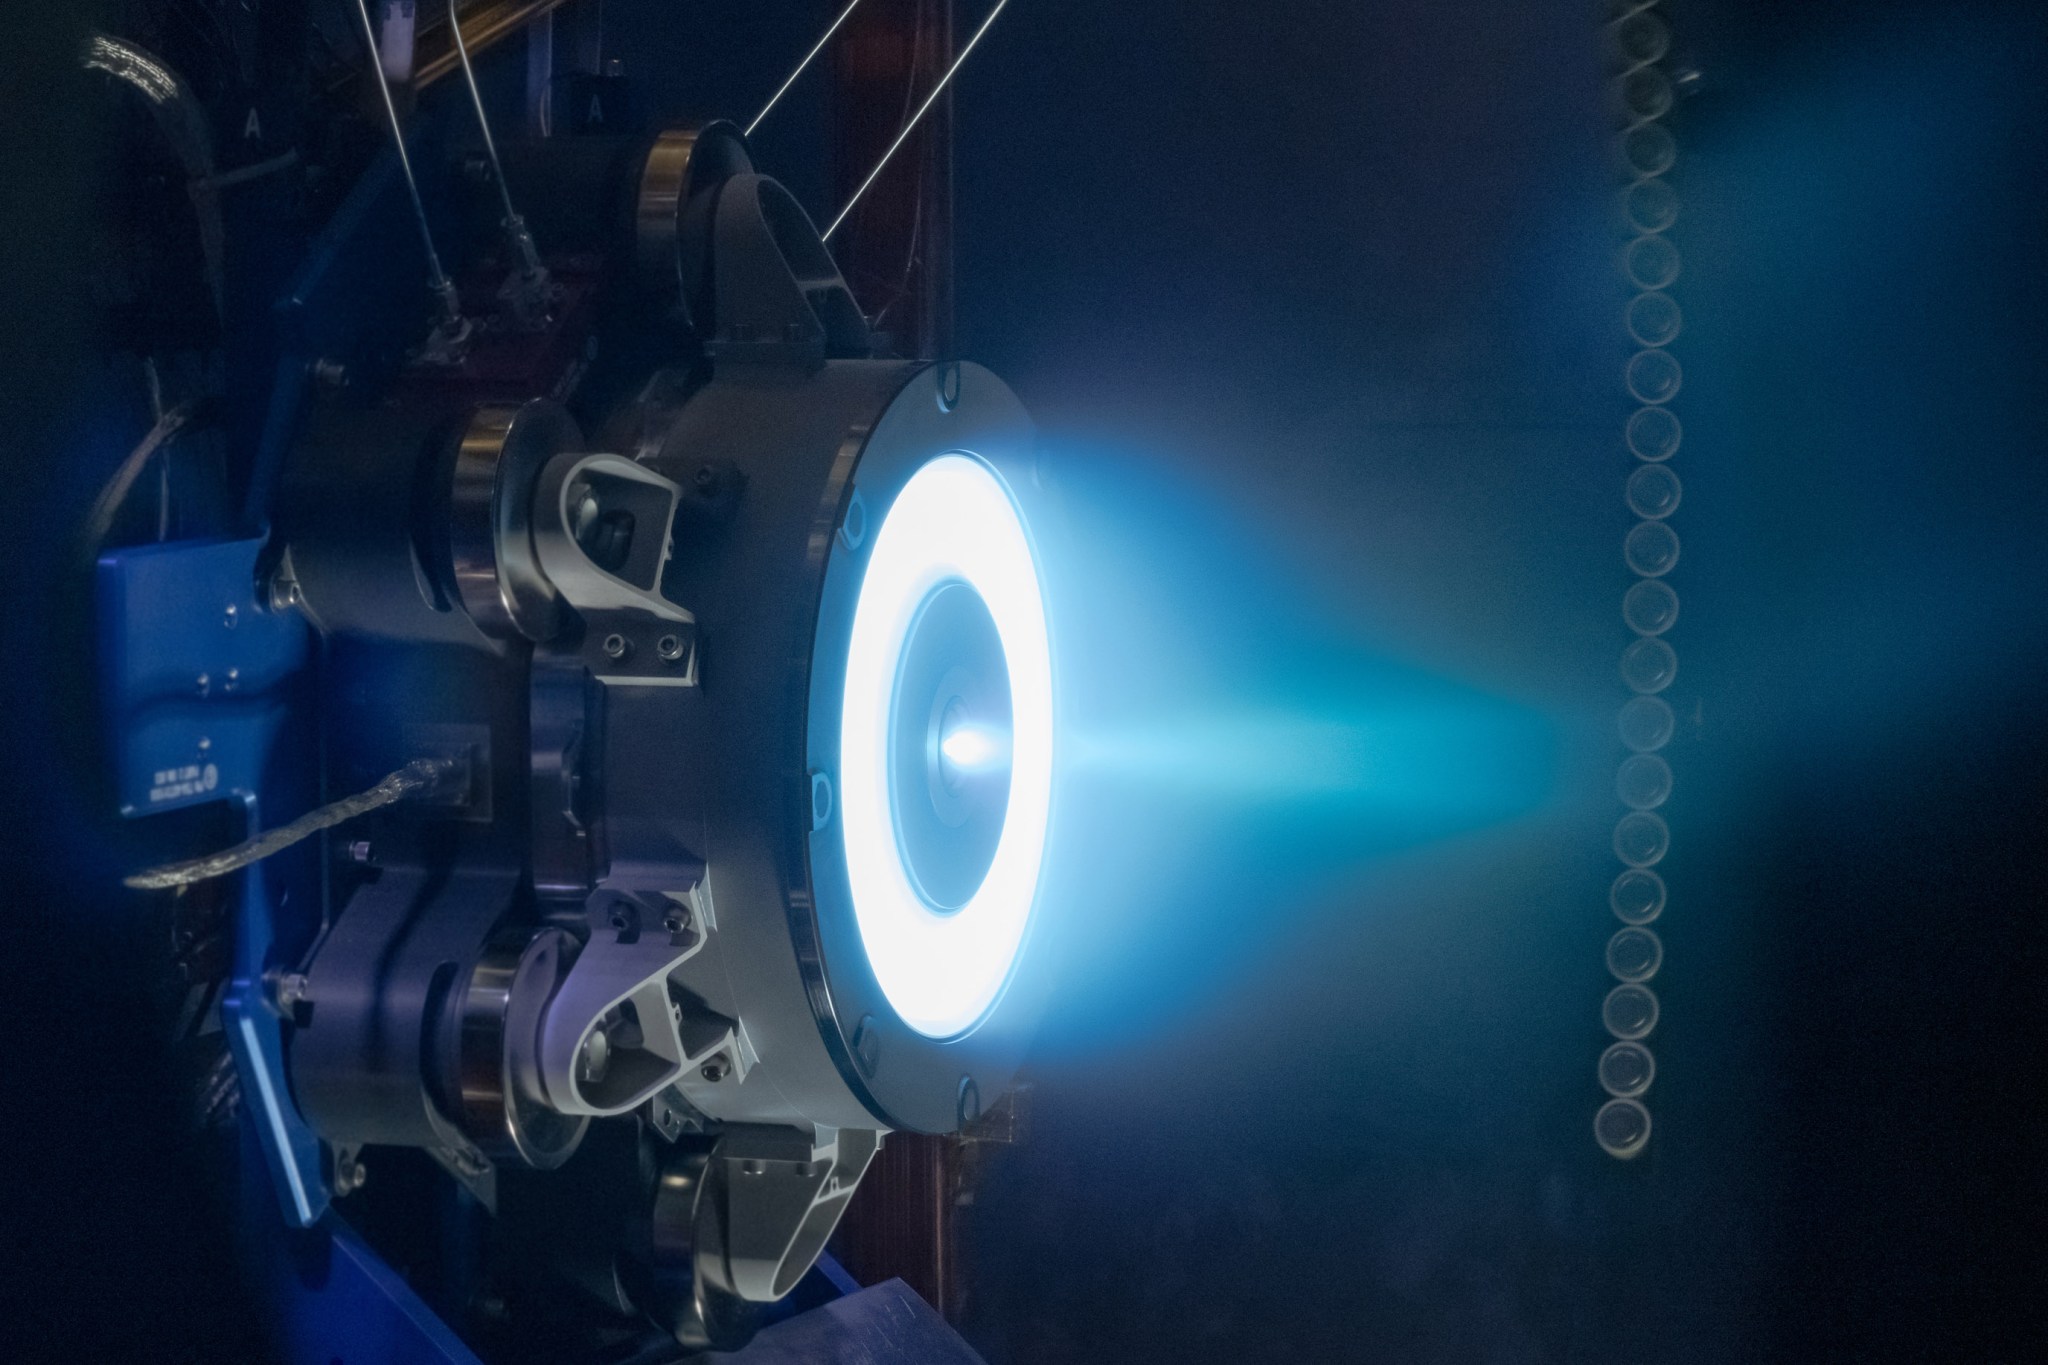 A solar electric propulsion thruster emits the blue hue of Xenon gas during testing. Vibrant blue light emanates in a circular shape from the dark grey thruster, which is mounted inside a vacuum chamber. The blue light then narrows into a plume as it moves farther away from the thruster, illuminating the otherwise darkened chamber.